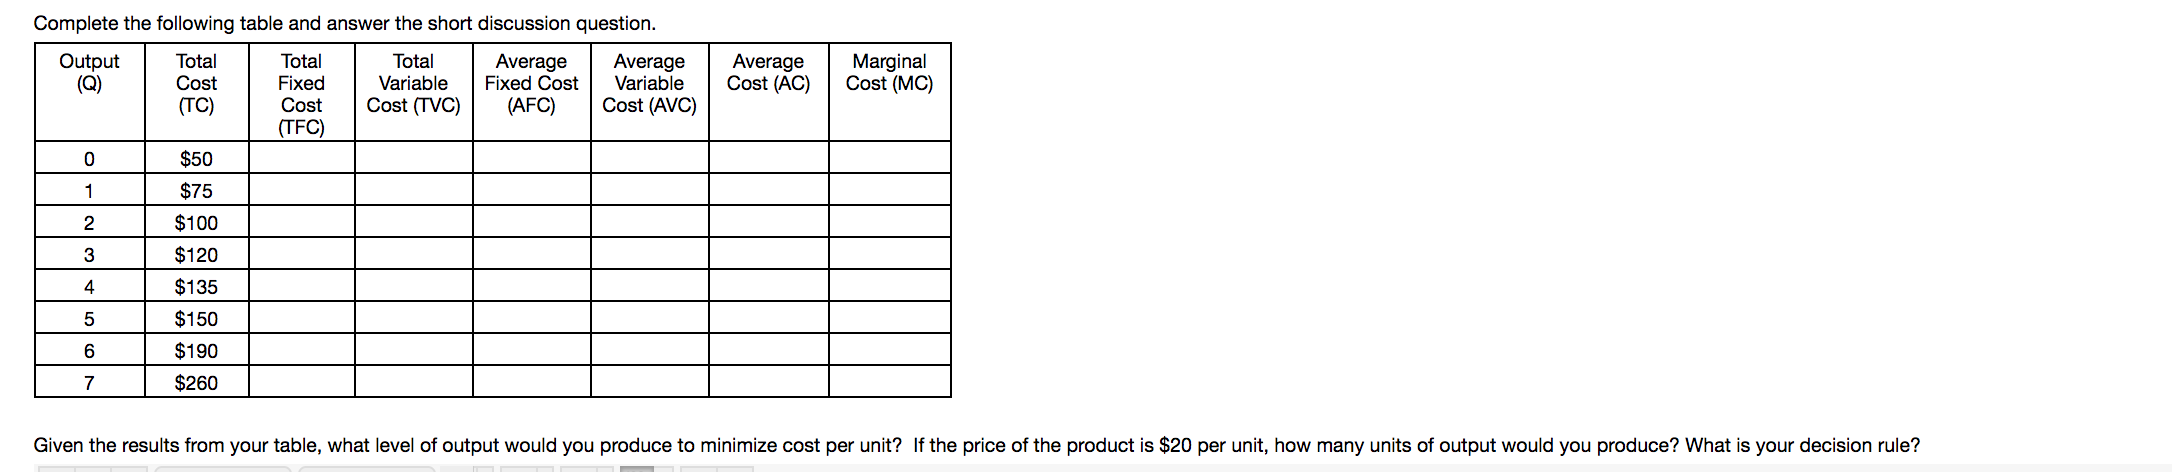 Complete the following table and answer the short discussion question
Marginal
Cost (MC)
Total
Output
(Q)
Total
Total
Average
Fixed Cost
Average
Variable
Cost (AVC)
Average
Cost (AC)
Cost
Fixed
Variable
Cost (TVC)
(АFC)
(ТC)
Cost
(TFC)
$50
0
$75
1
$100
2
$120
$135
$150
5
$190
6
$260
7
Given the results from your table, what level of output would you produce to minimize cost per unit? If the price of the product is $20 per unit, how many units of output would you produce? What is your decision rule?
